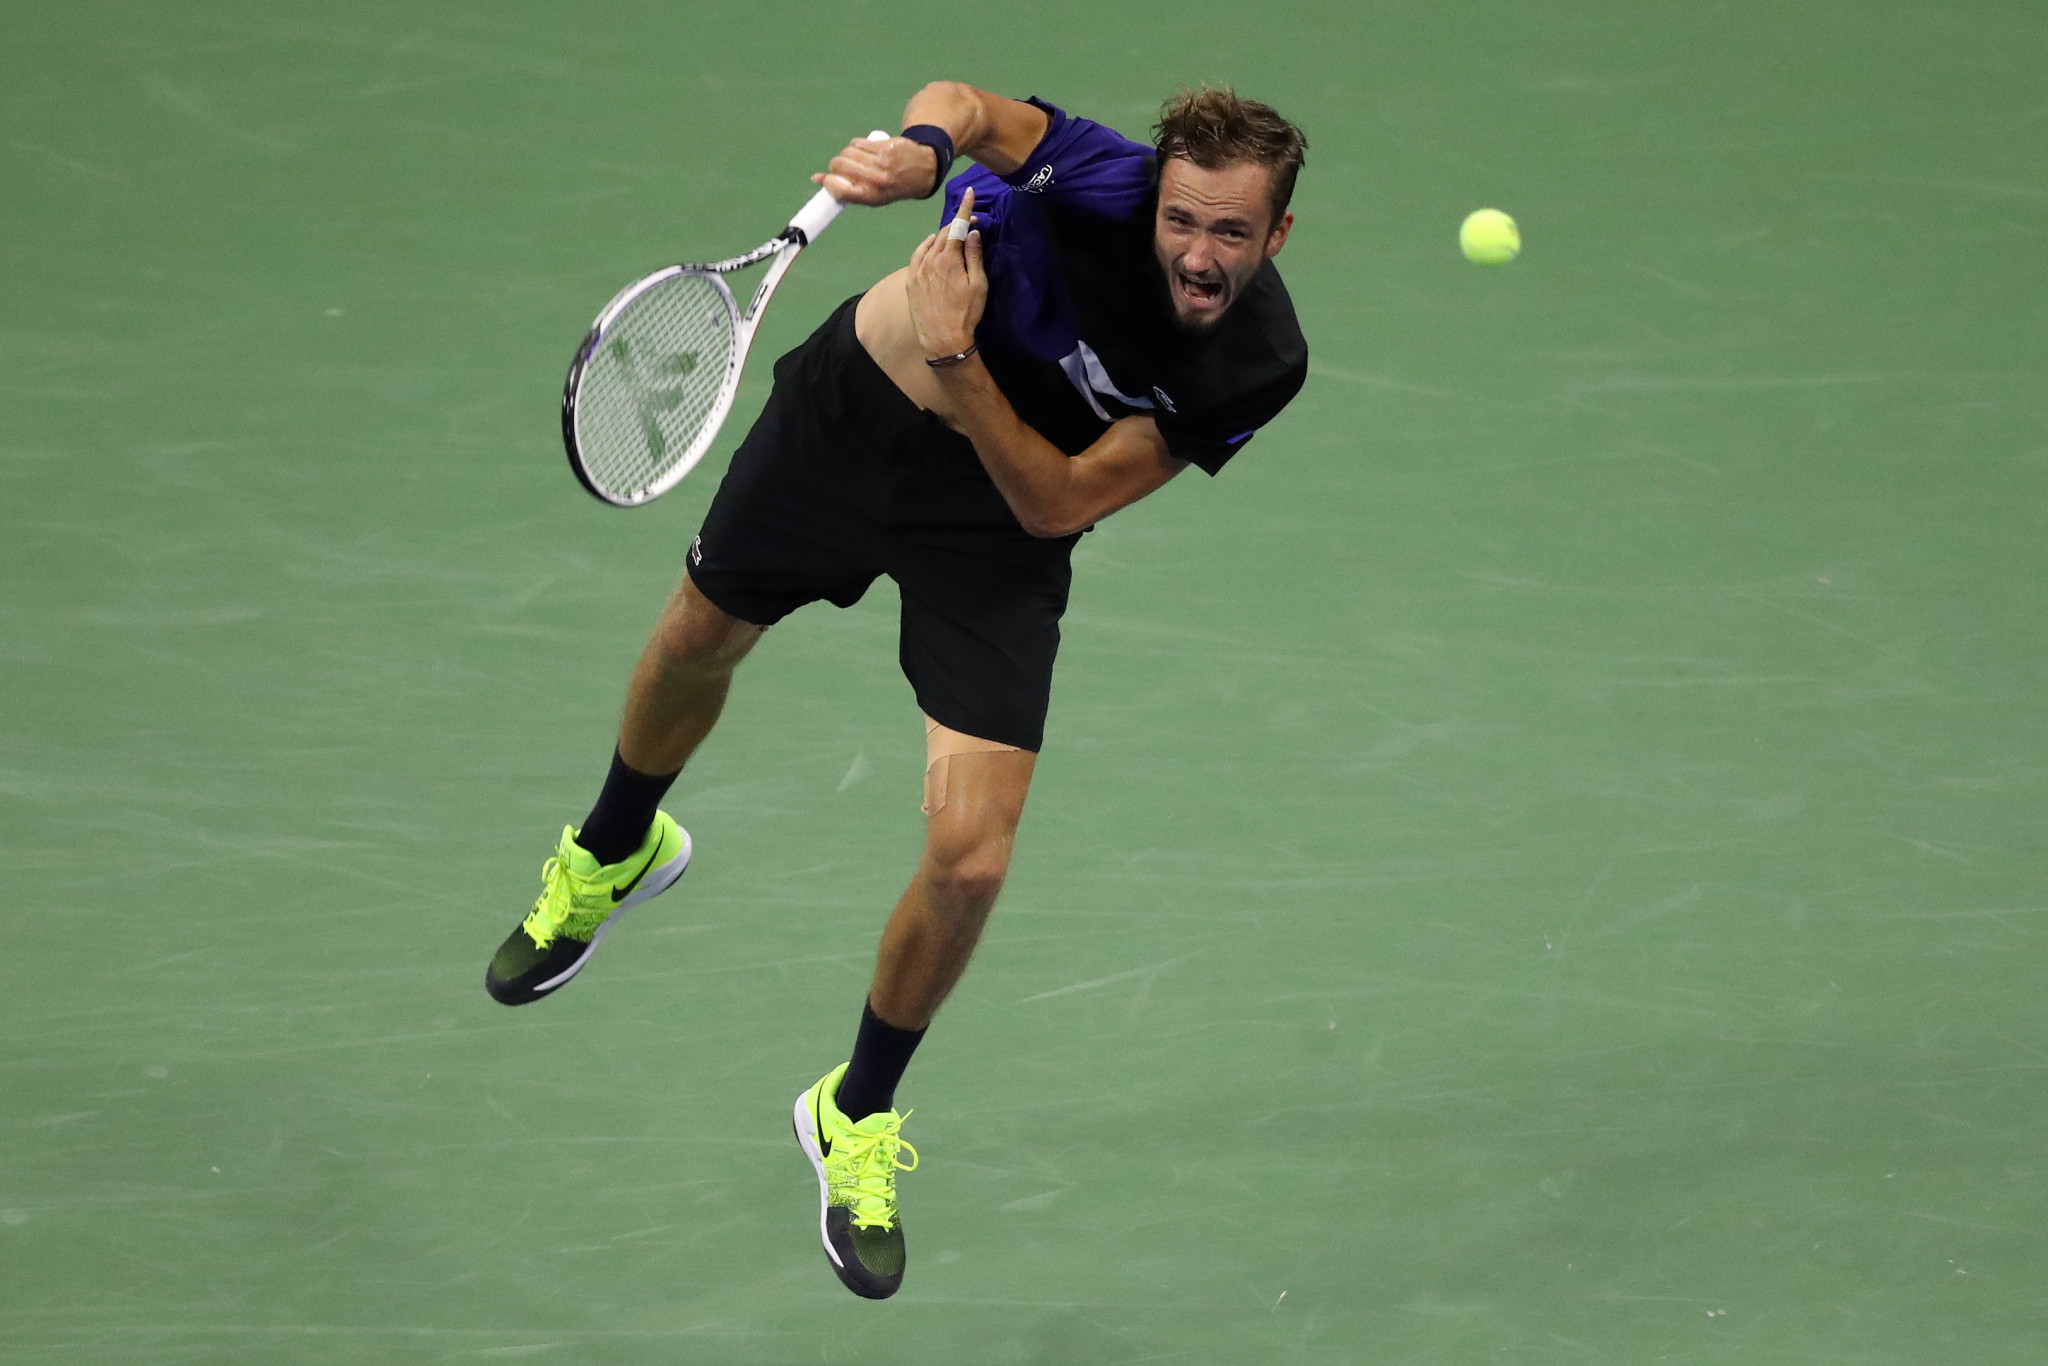 Daniil Medvedev will look to replicate his form from the 2019 US Open ©Getty Images 